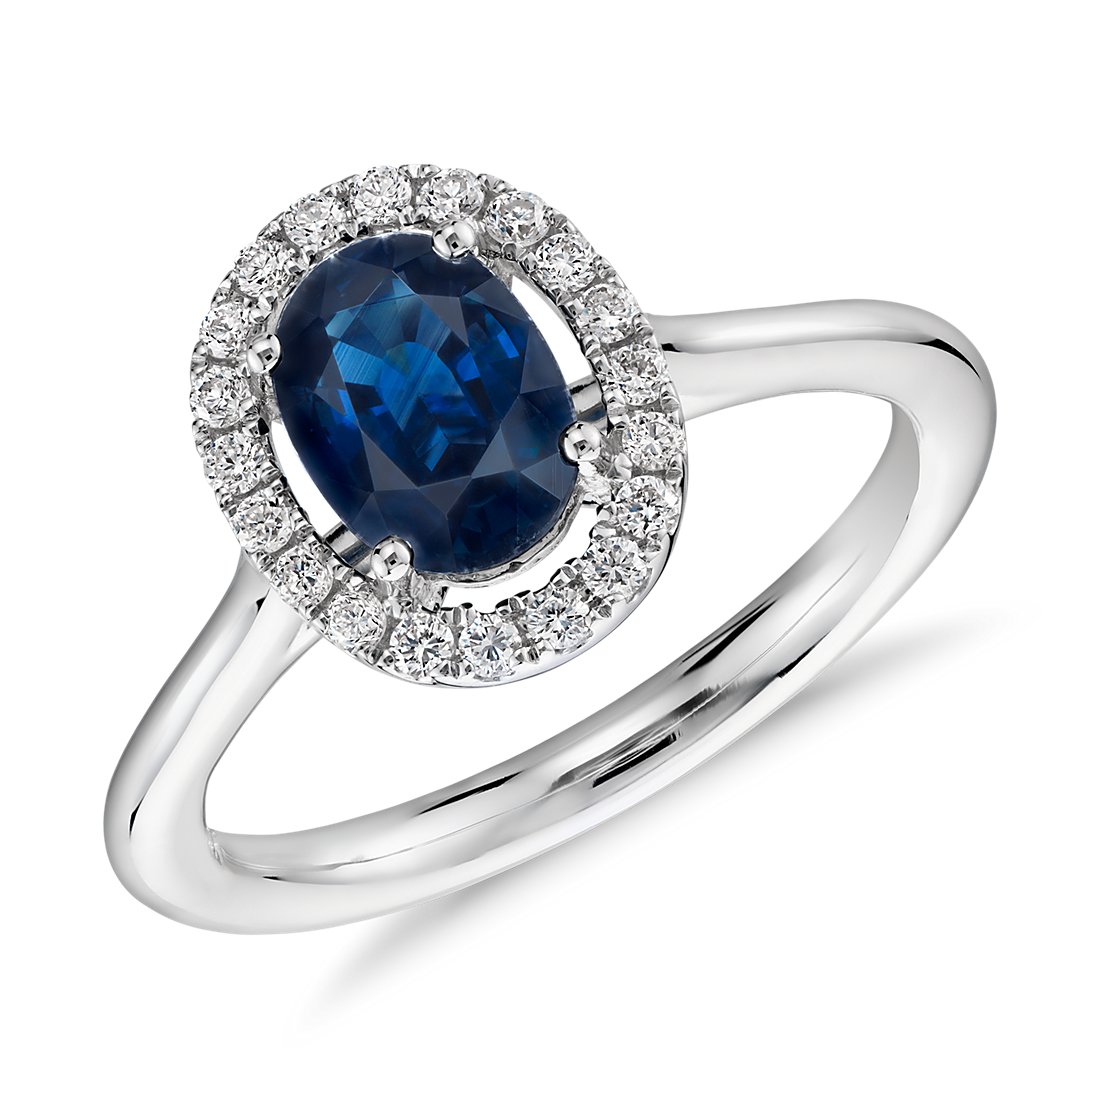 Sapphire and diamond engagement ring 